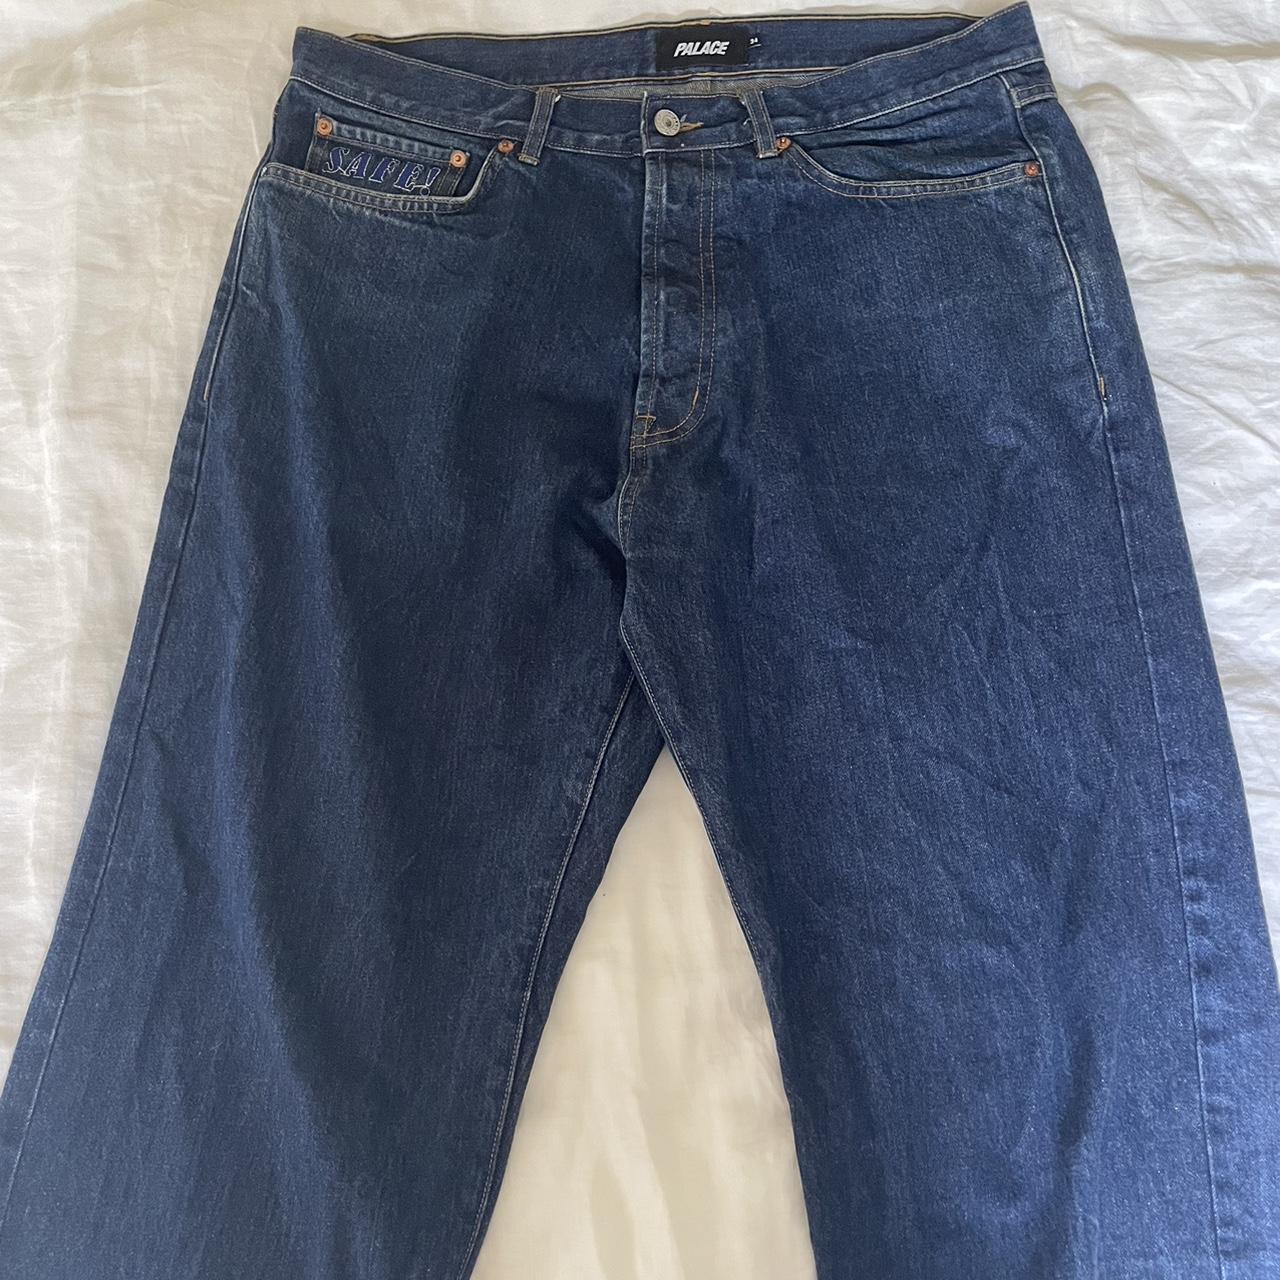 Palace jeans Size - 34/34 No marks or holes Selling... - Depop